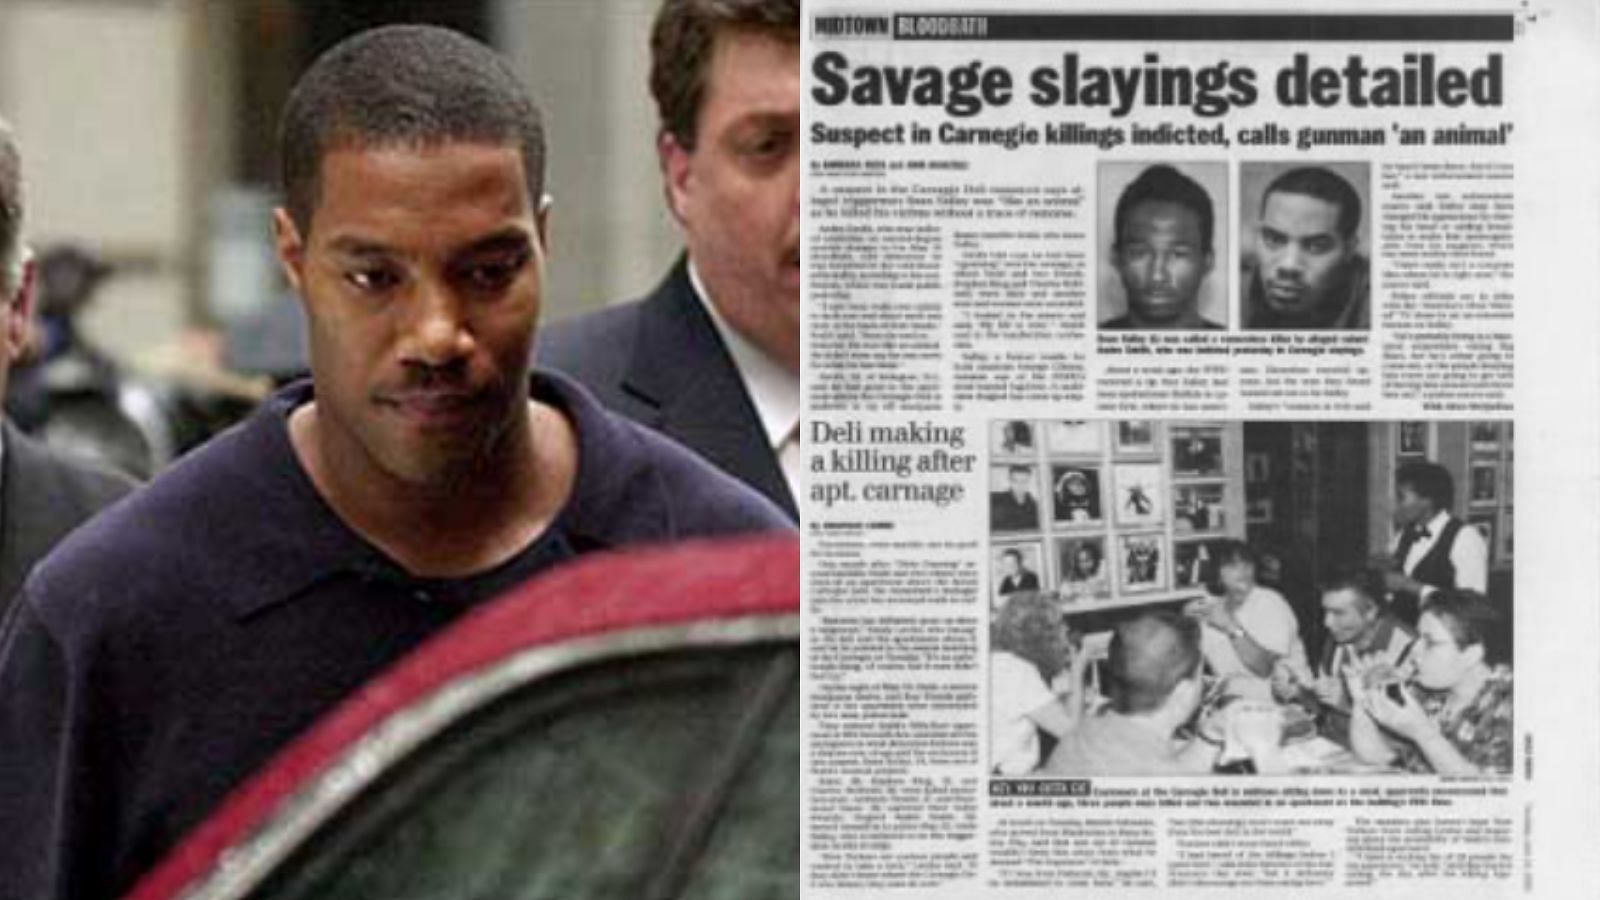 Sean Salley and Andre Smith were convicted of murder (Images via Oxygen)